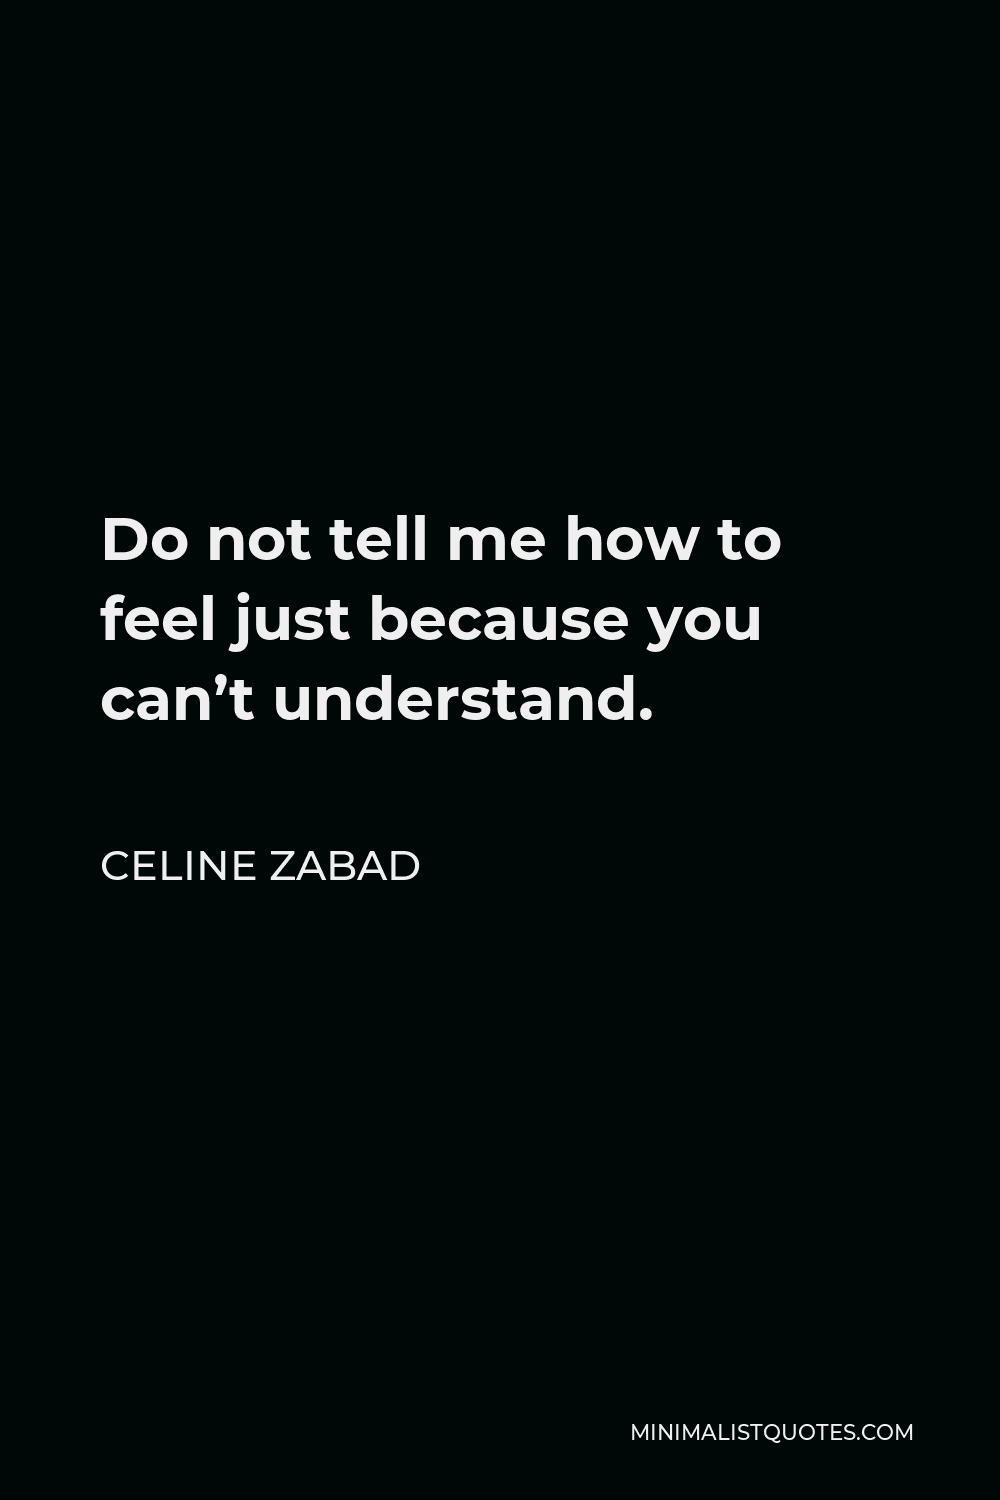 Celine Zabad Quote - Do not tell me how to feel just because you can’t understand.